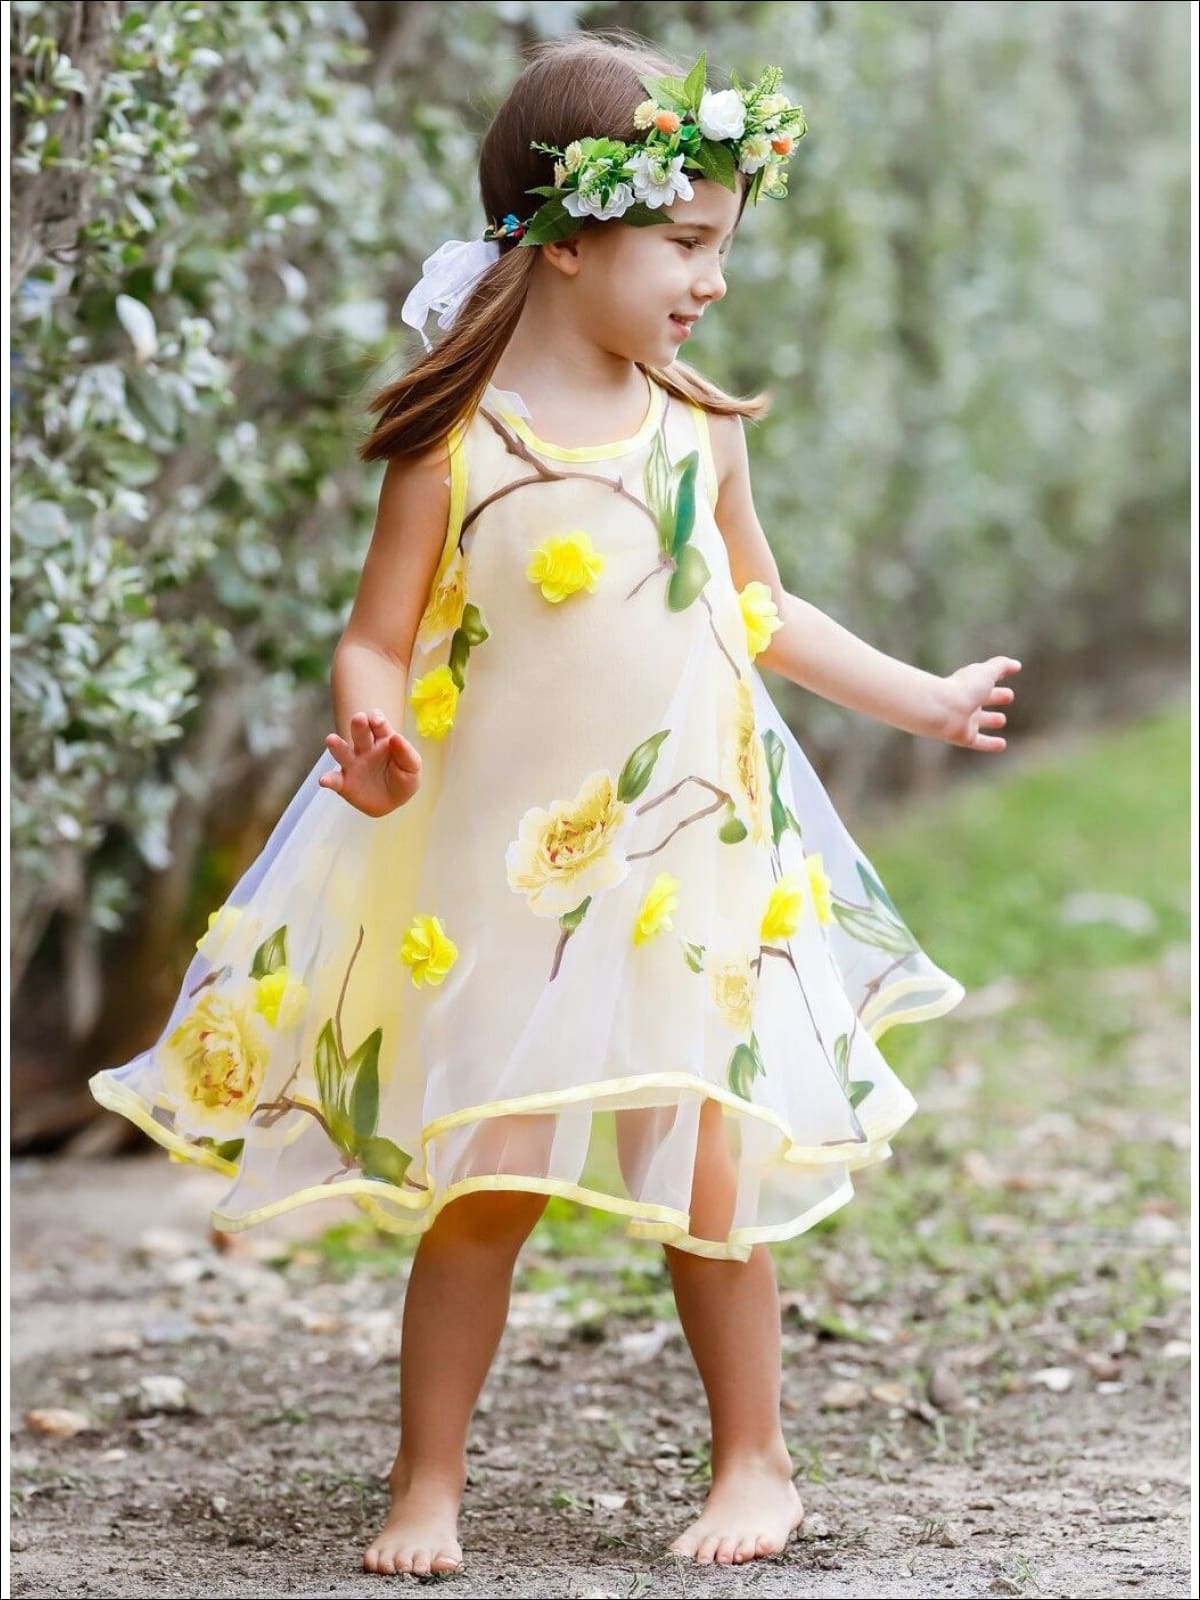 2022 Rainbow Chiffon A Line Pageant Dress For Girls | Sleeveless Straps  Neck Prom Gown With Zipper V Back Kids Formal Birthday Princess Outfit From  Enjoyweddinglife, $91.48 | DHgate.Com